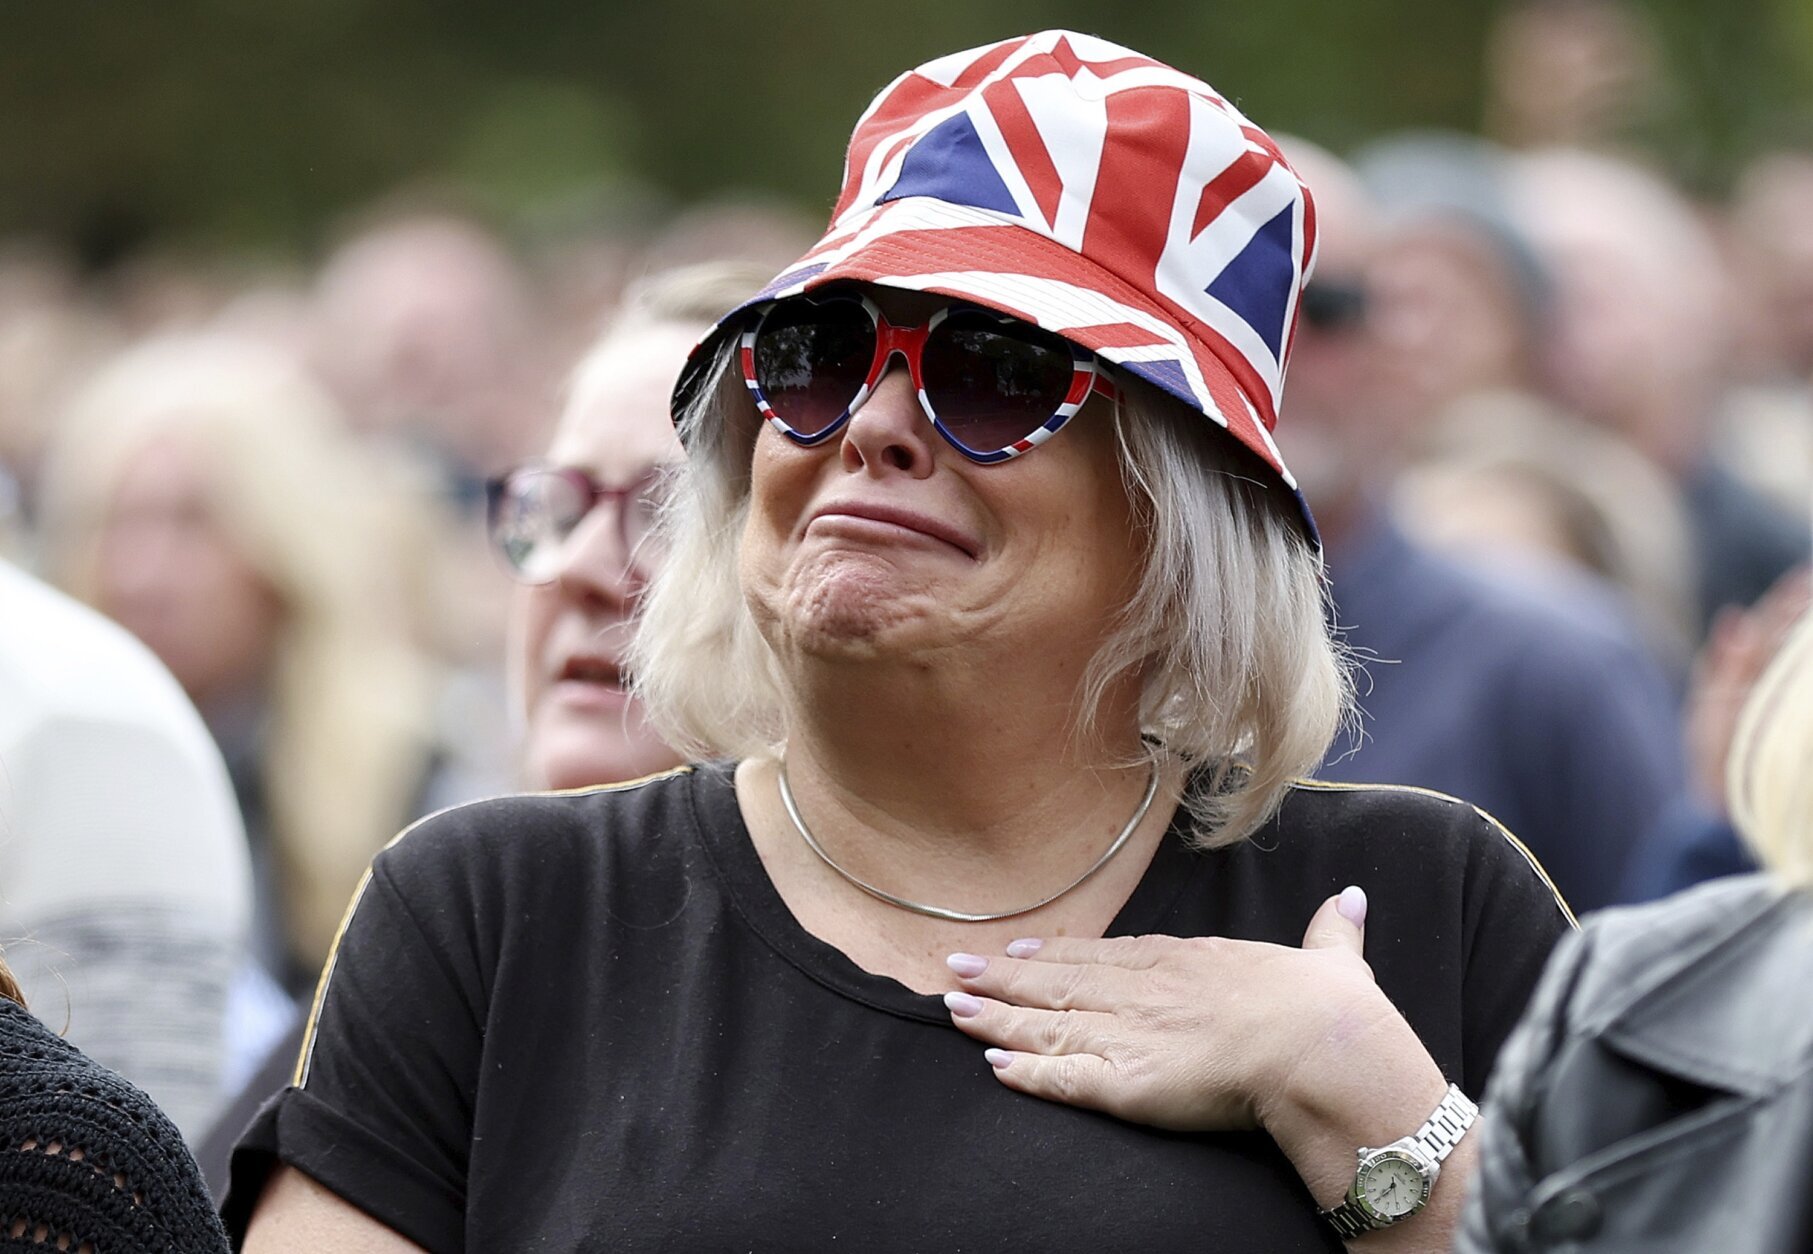 A woman reacts as she watches the Queen Elizabeth II funeral on a giant screen set near Windsor Castle, in Windsor, England, Monday, Sept. 19, 2022, before the committal service at St George's Chapel of Queen Elizabeth II. (Alex Pantling/Pool photo via AP)